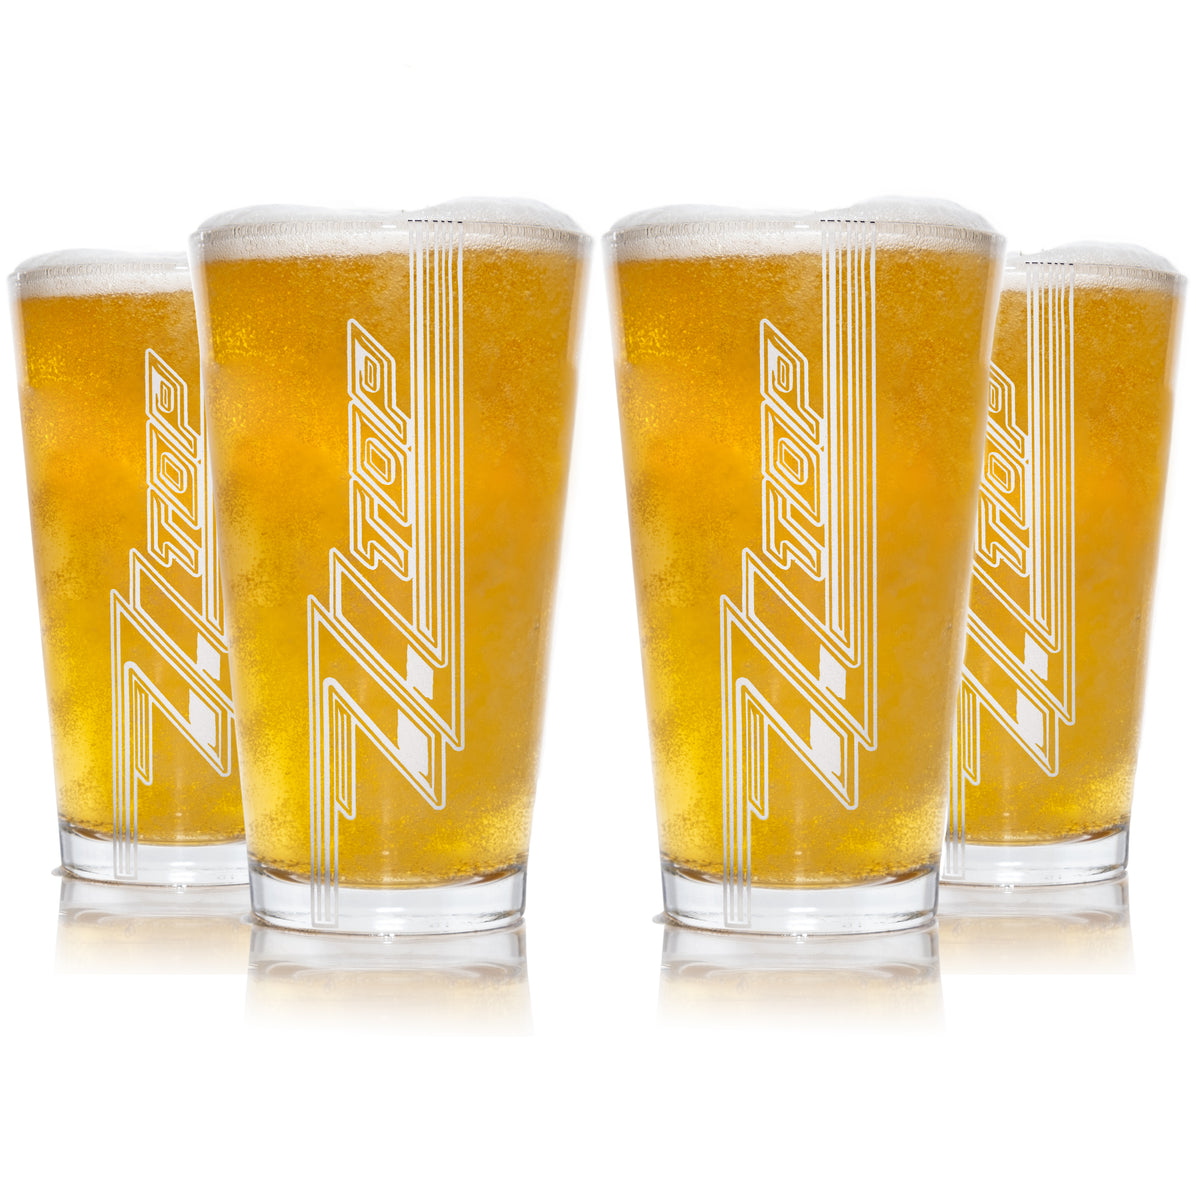 ZZ TOP: Pint Glass - Sand-blasted Etching Vertical Logo Set of 4